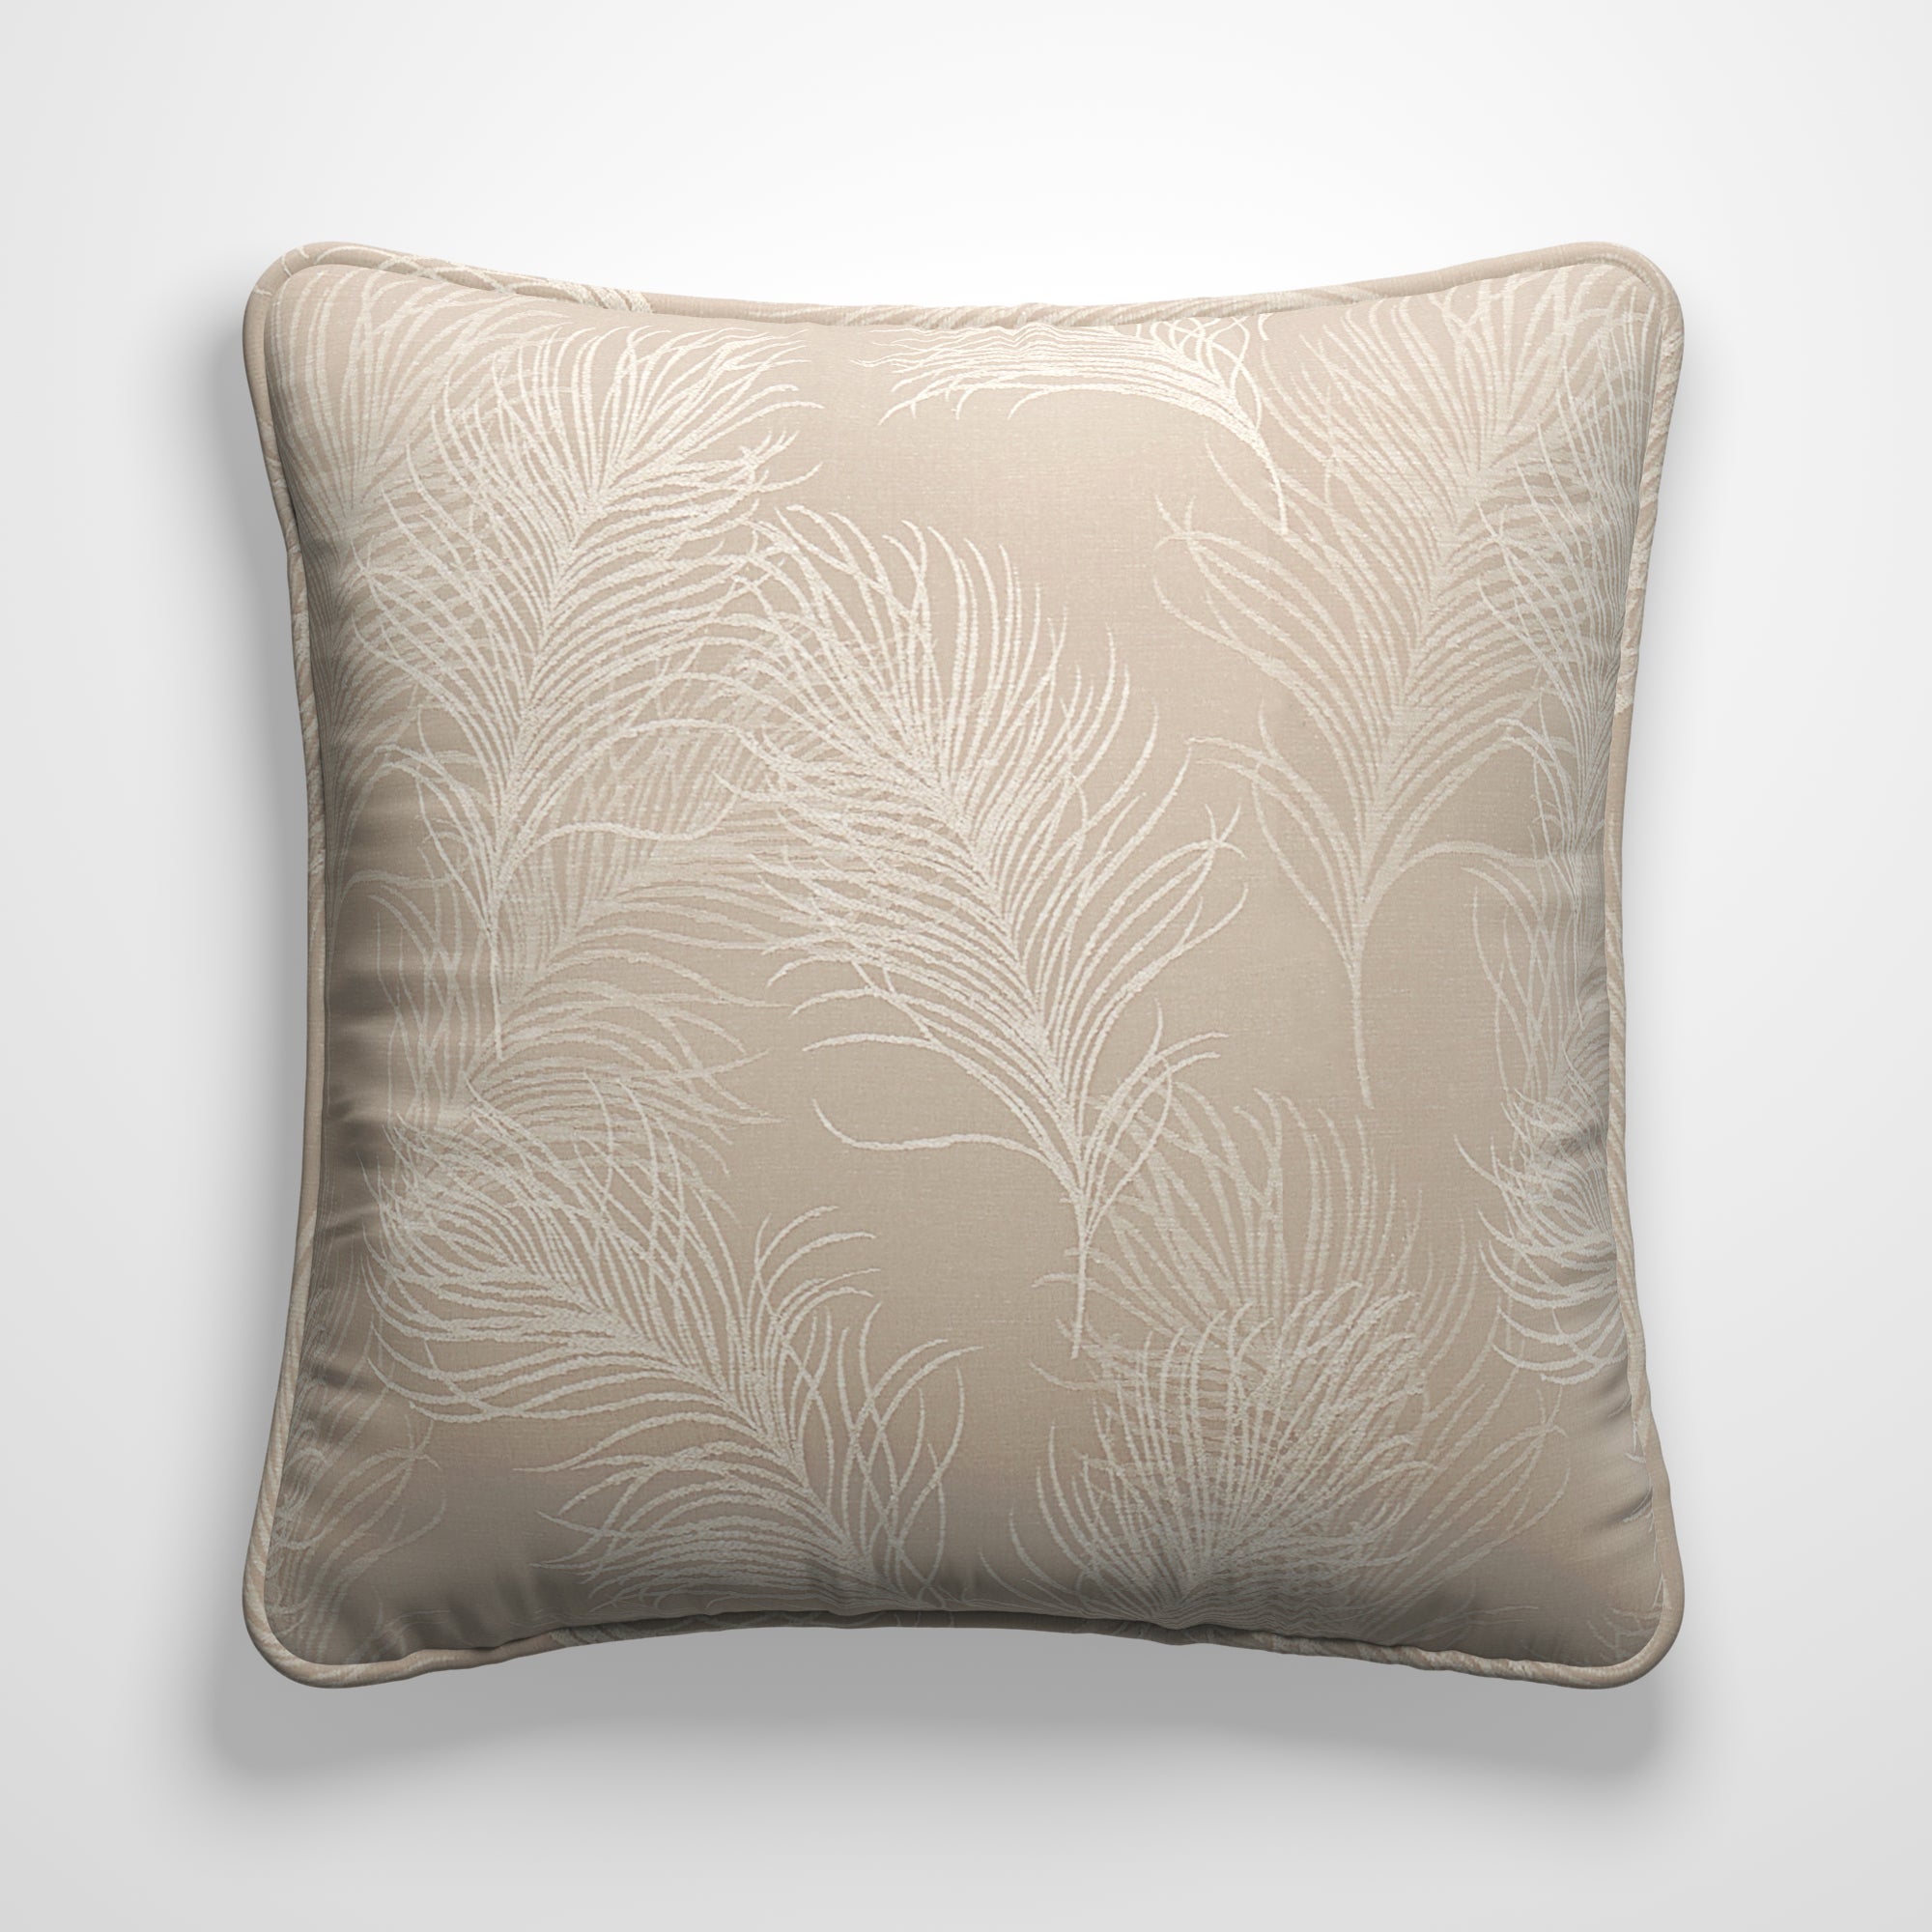 Feathers Made to Order Cushion Cover Feathers Coffee